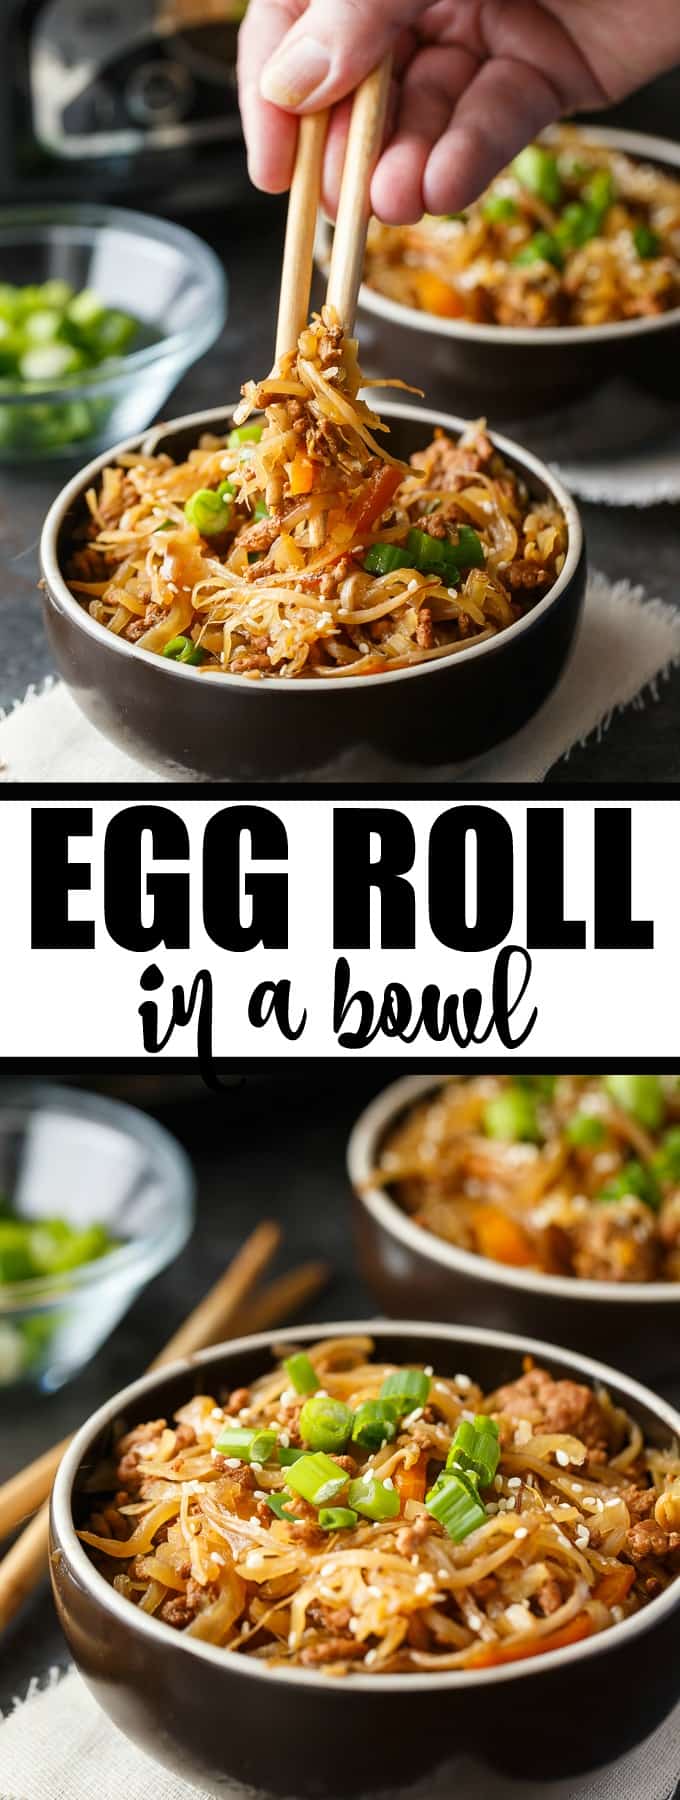 Egg Roll in a Bowl - Everything you love about egg rolls without all the fuss! Forget the wrapper and enjoy the delicious and savoury taste of the inside of an egg roll. So easy to make in your Crock-Pot.